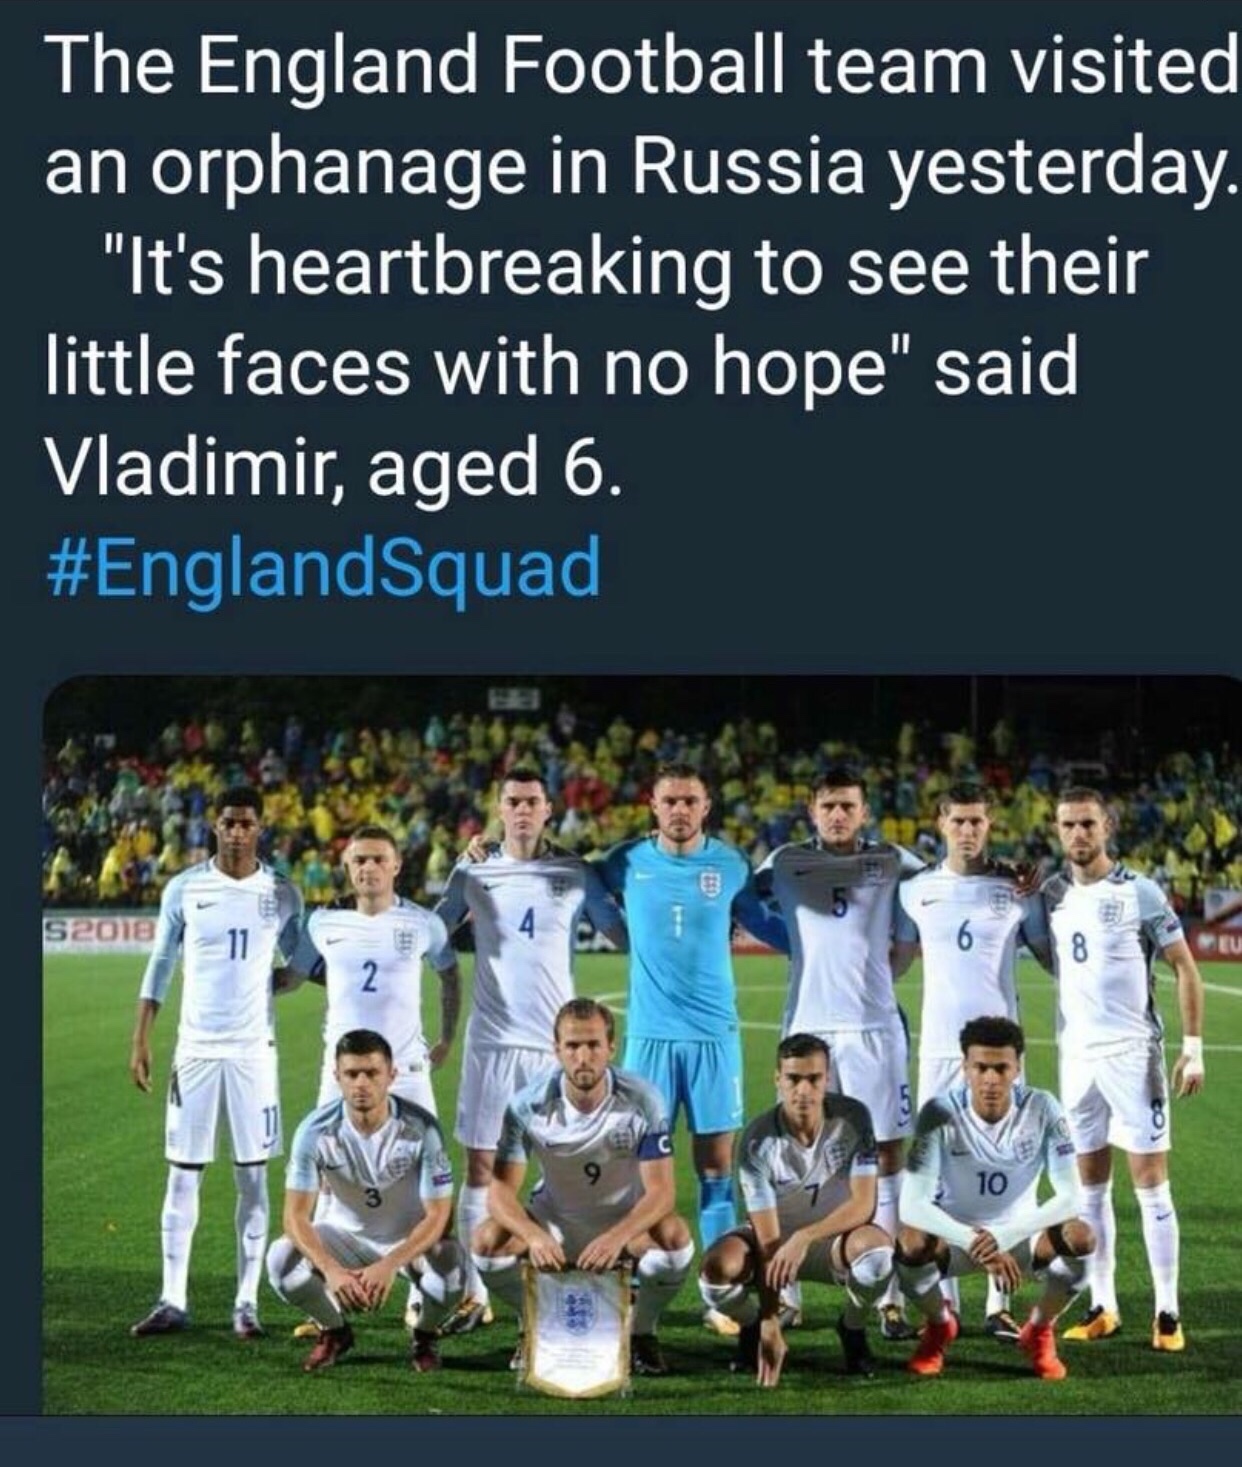 england team world cup 2018 - The England Football team visited an orphanage in Russia yesterday. "It's heartbreaking to see their little faces with no hope" said, Vladimir, aged 6. Spot